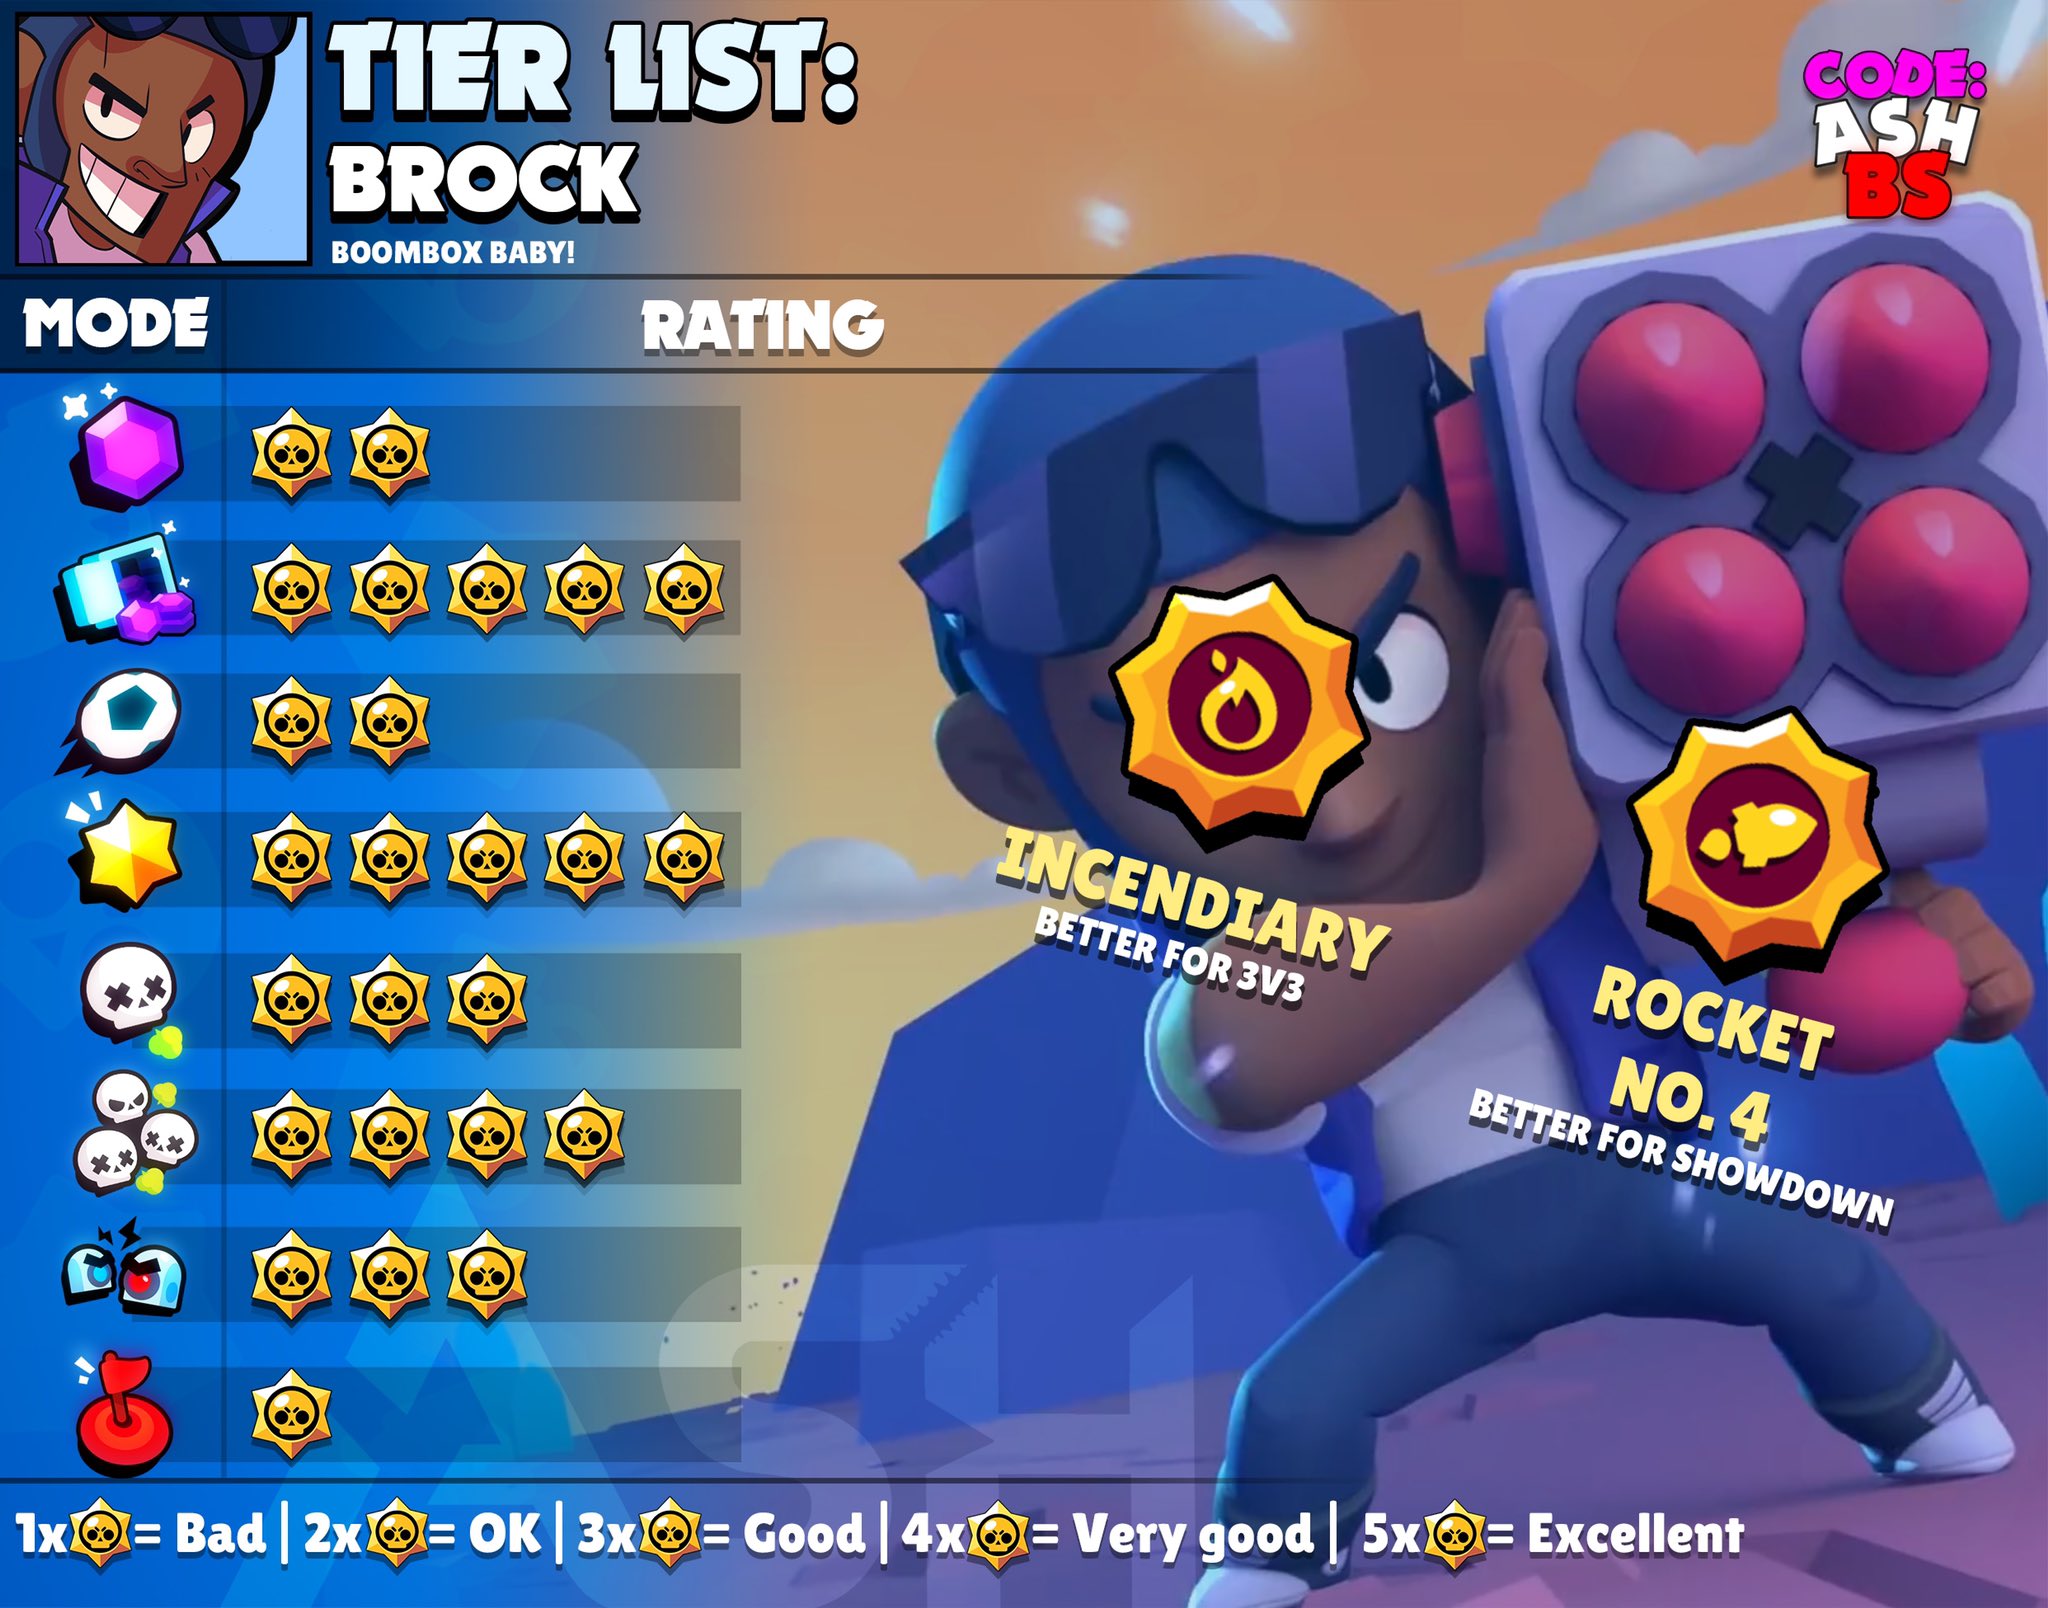 Code Ashbs On Twitter Brock Tier List For Every Game Mode With Best Maps And Suggested Comps Which Brawler Should I Do Next Brock Brawlstars Https T Co Igweji73sr - brawl stars siege tier list